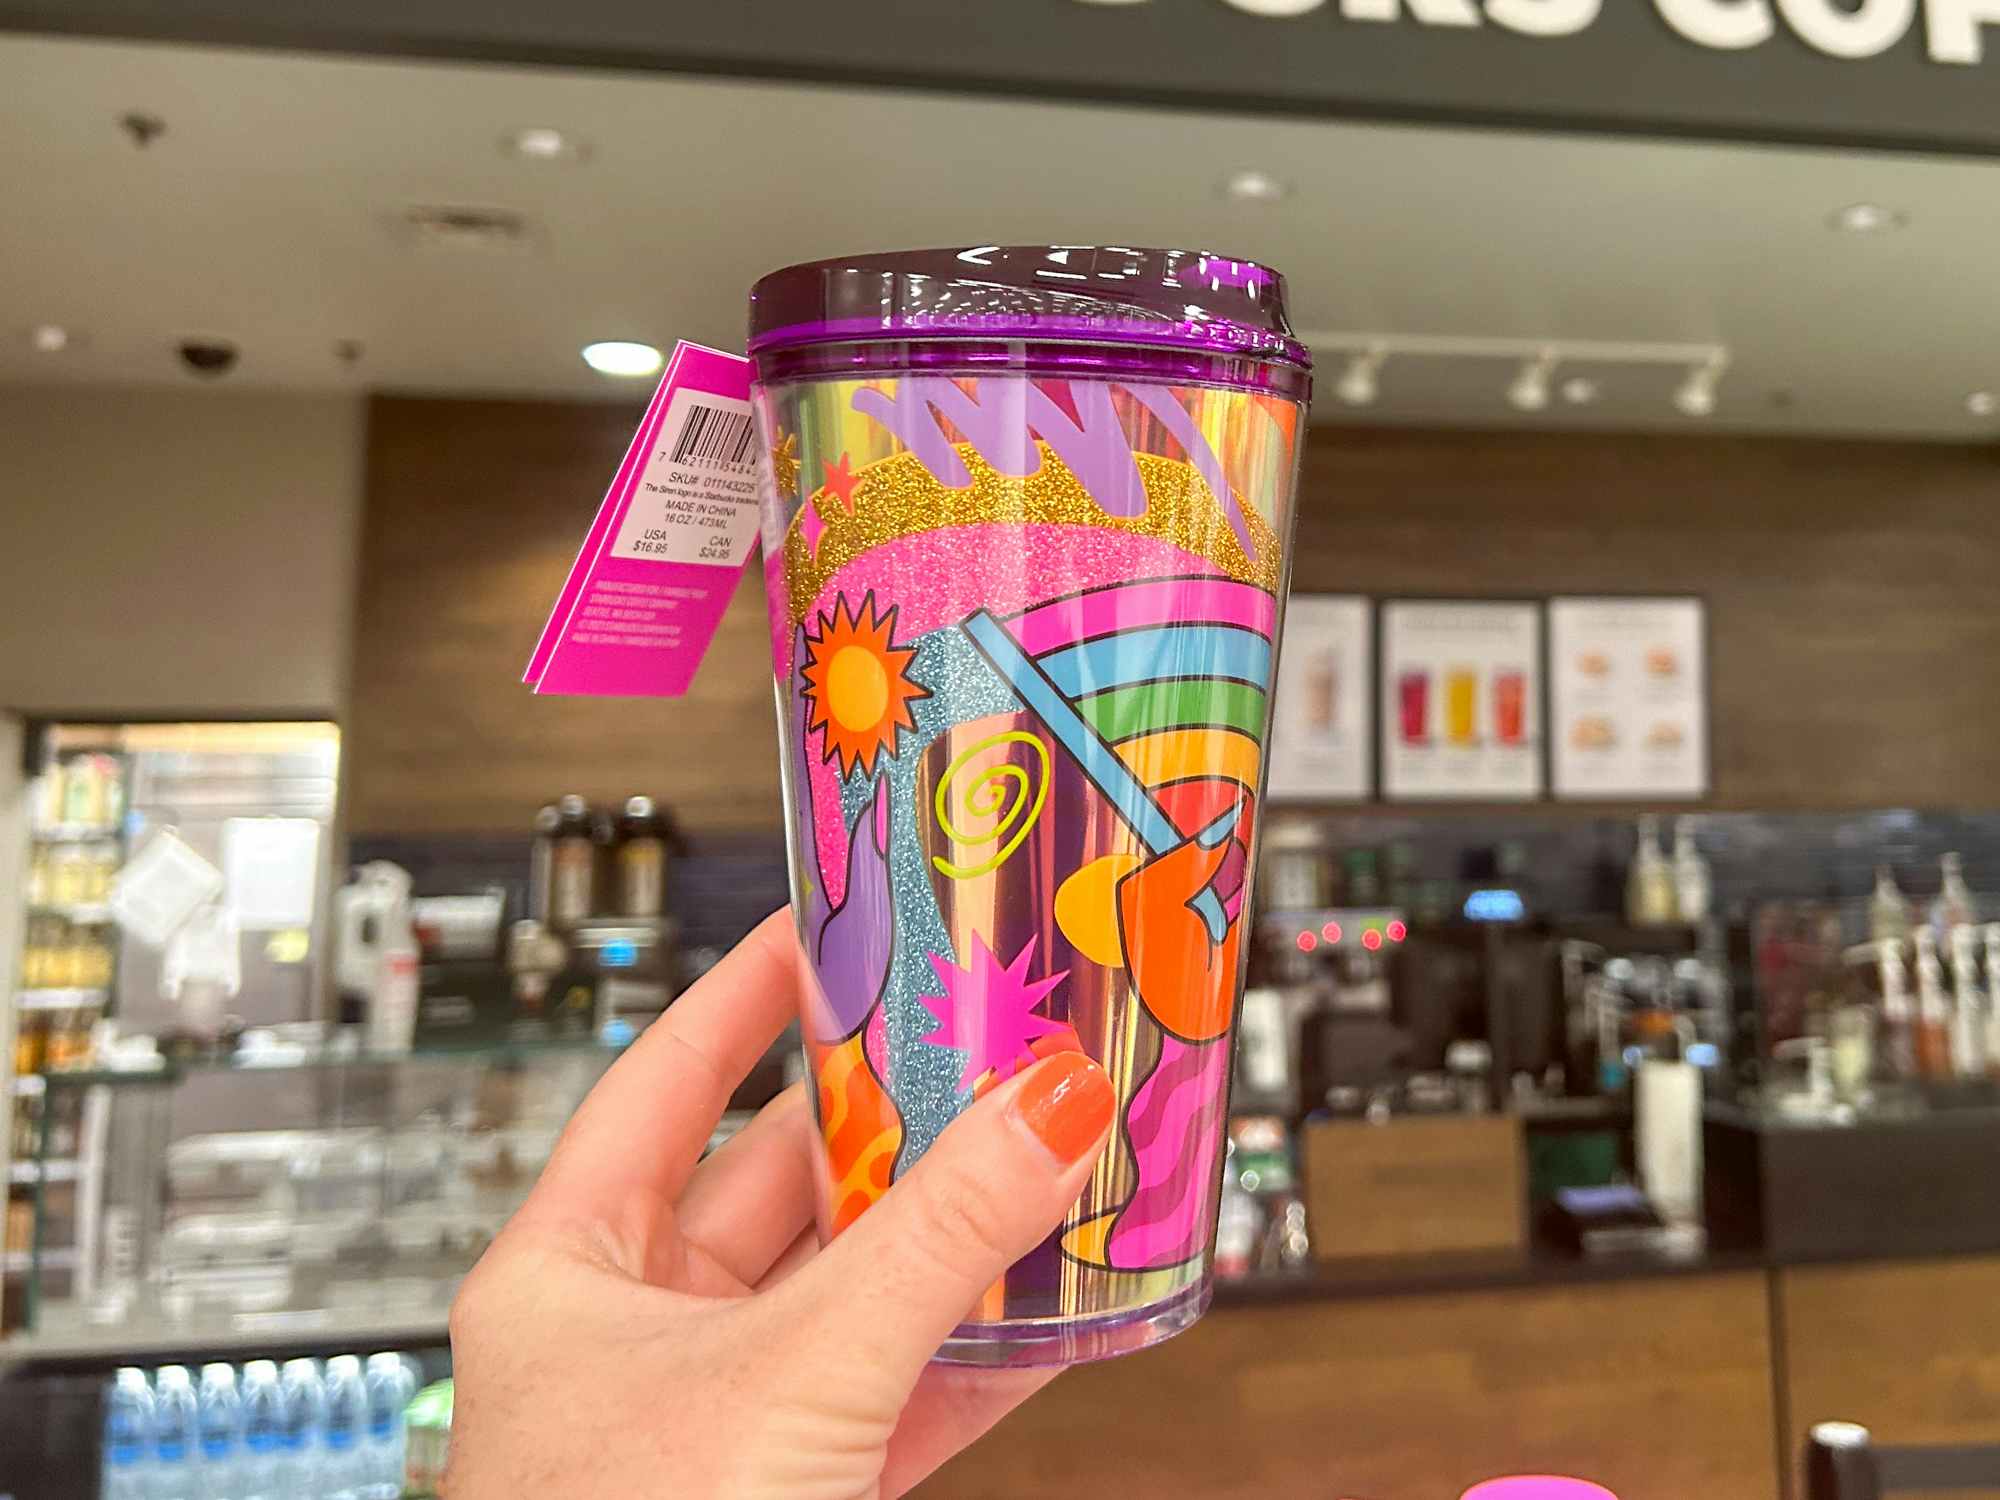 Someone holding up a Starbucks Pride cup inside a Starbucks